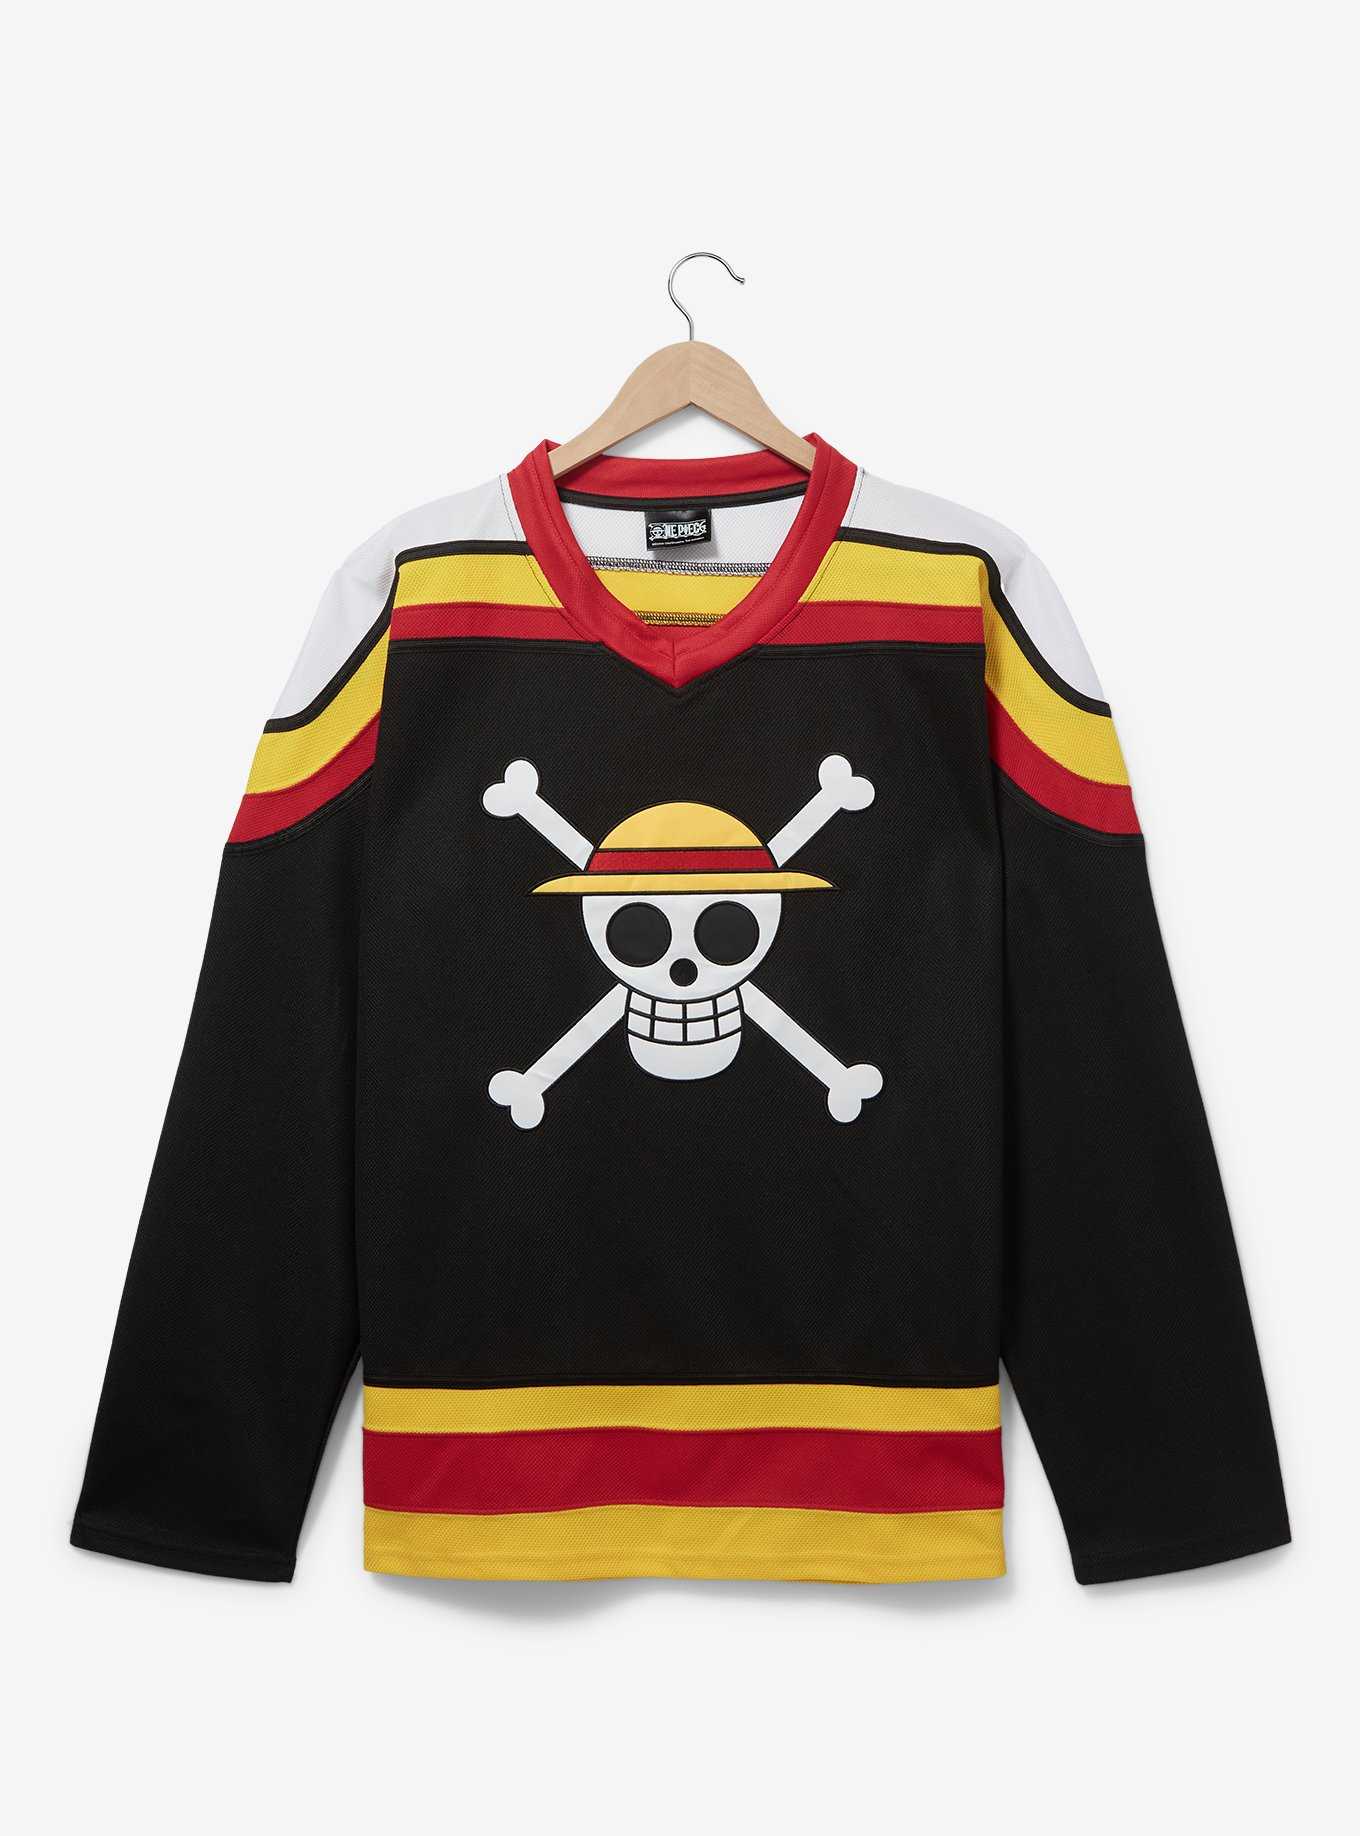 Anime One Piece Find bigsize clothes